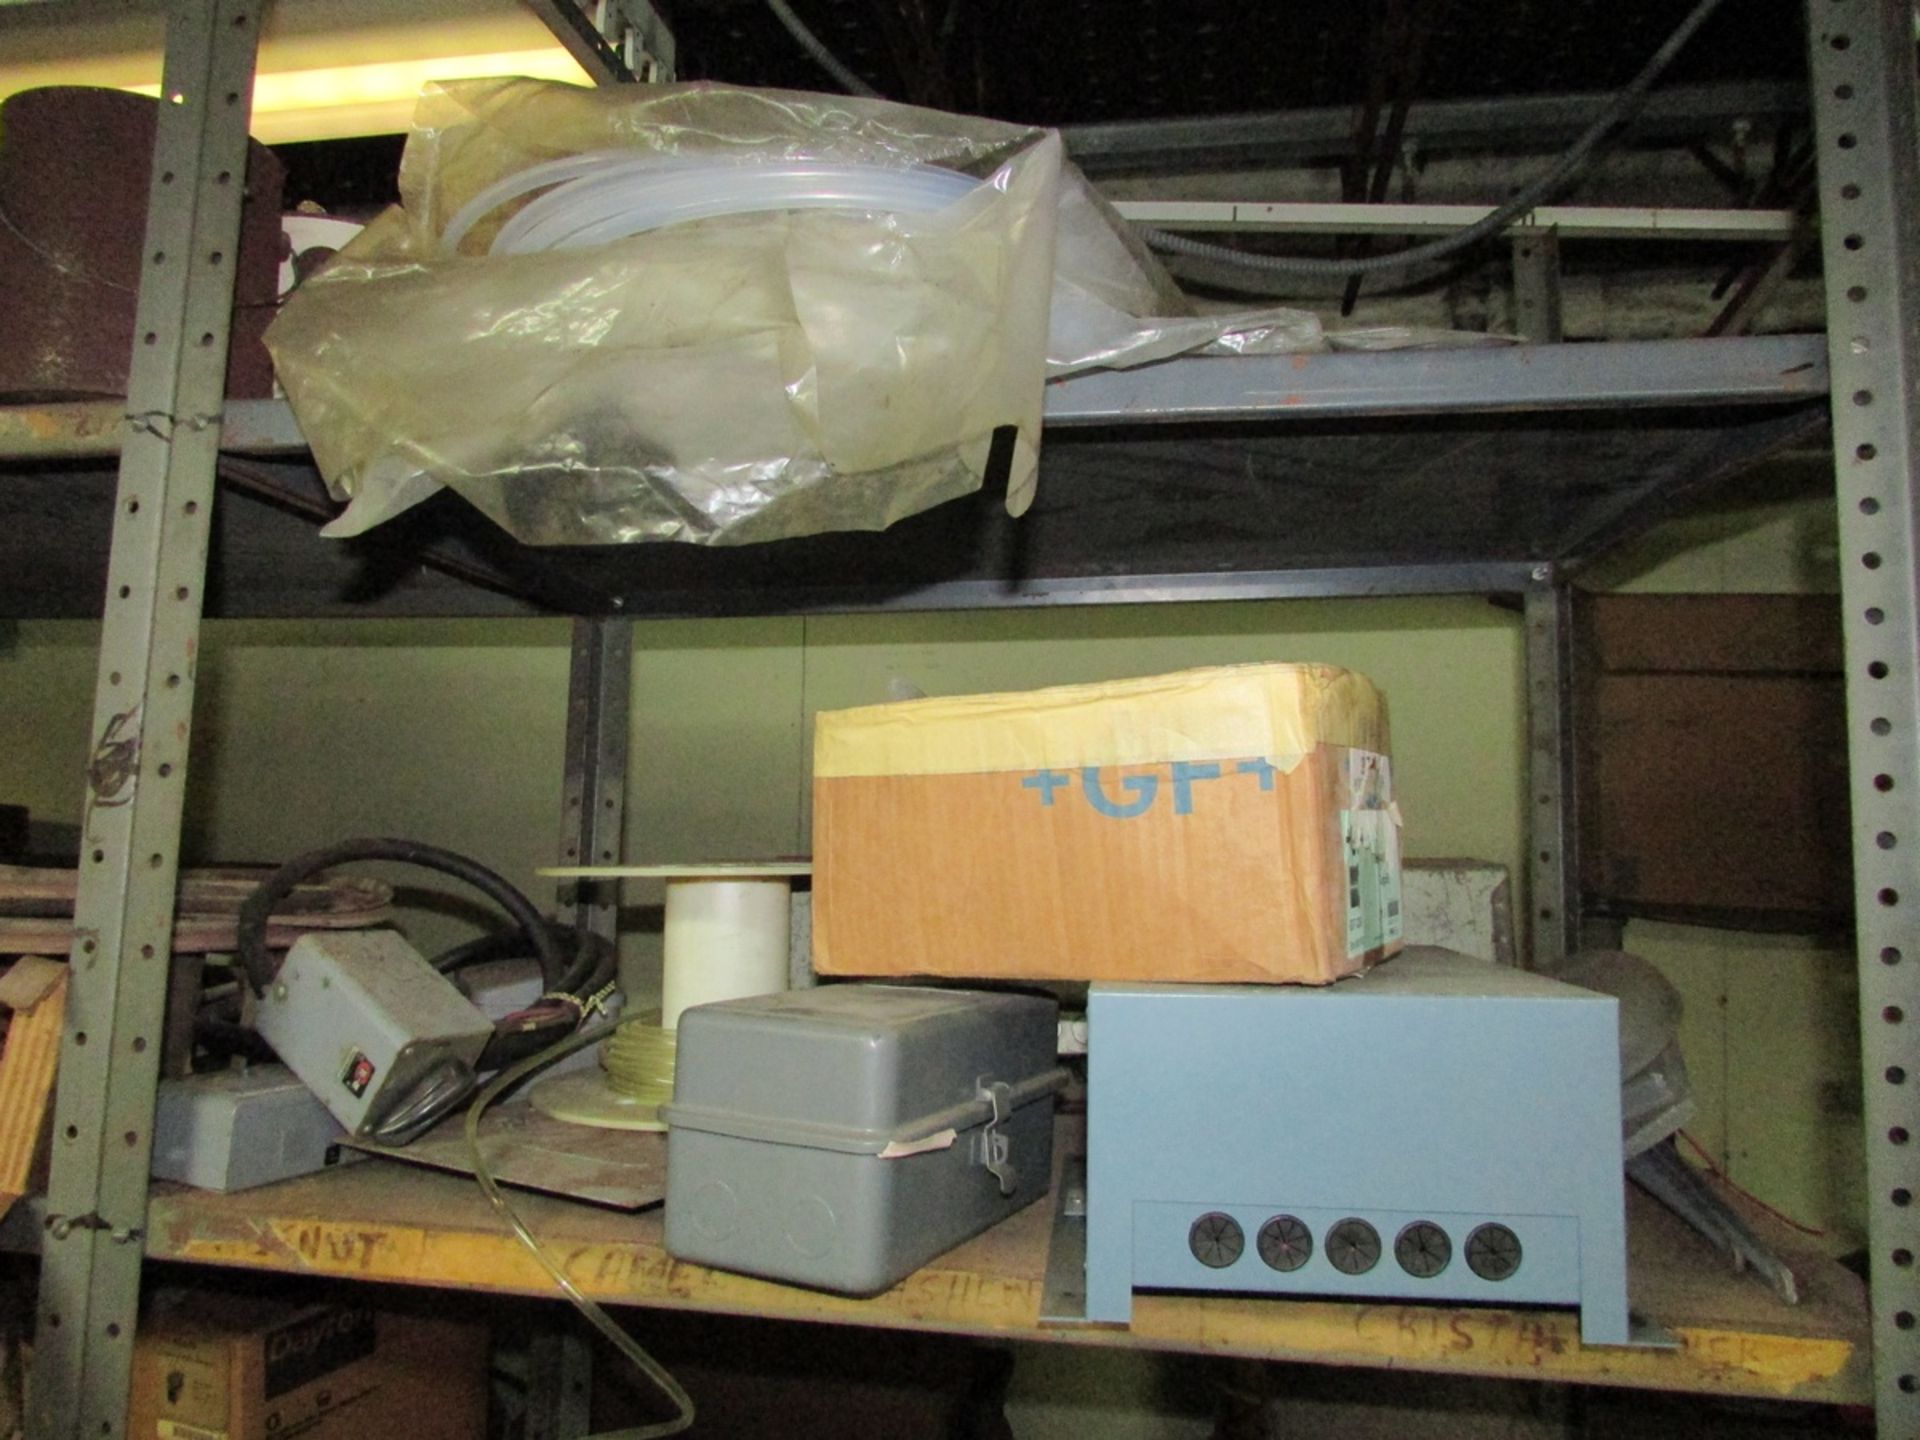 Contents of Tool Room, To Include Adjustable Shelving Units, Assorted Hand Tools, Pipe Wrenches, - Image 23 of 32